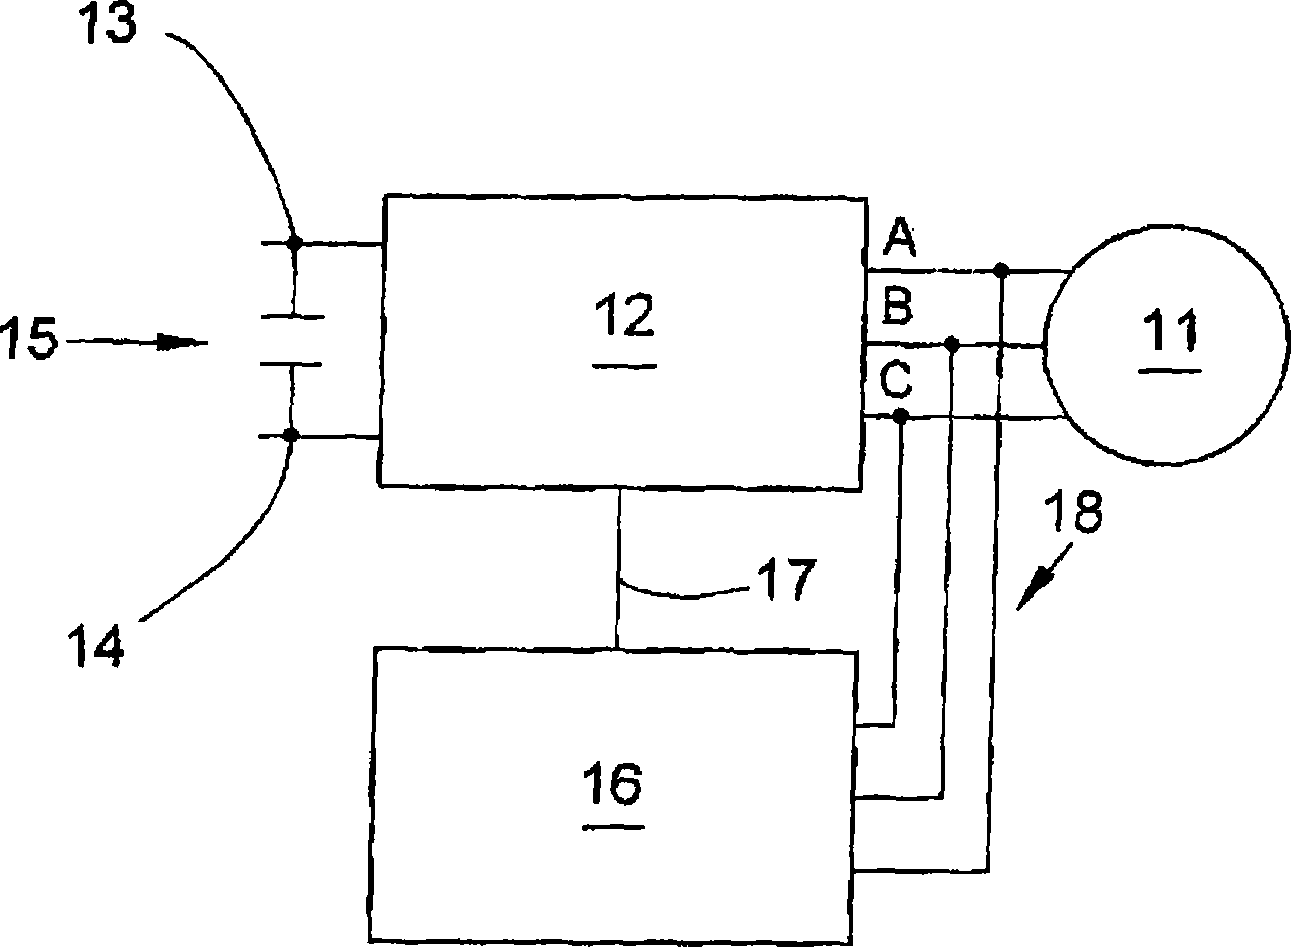 Electronically commutated direct current machine sensor-less operation